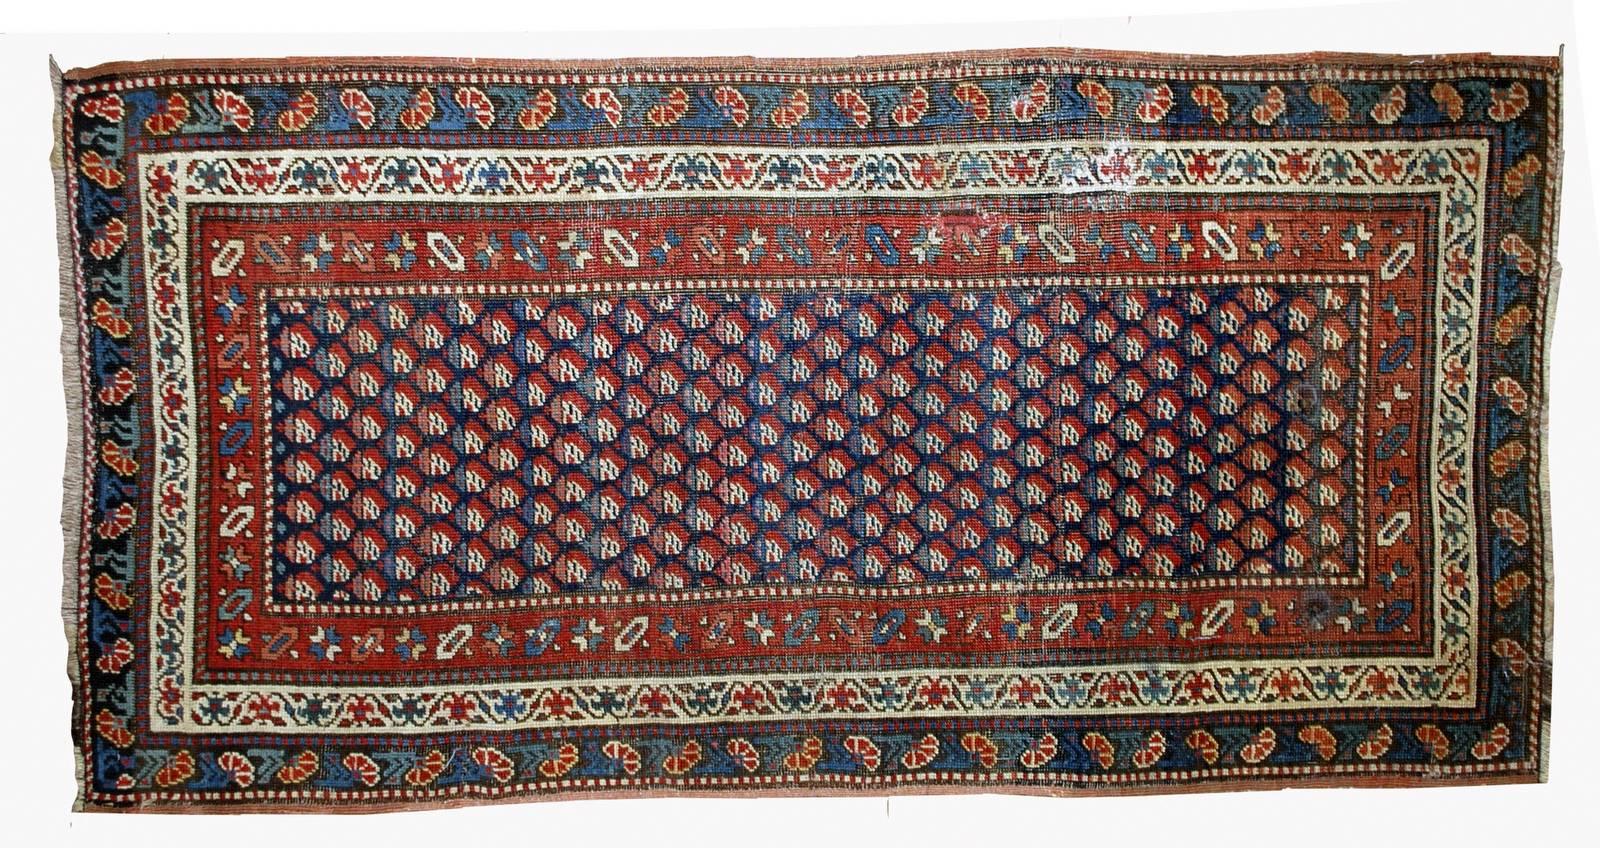 Antique handmade Caucasian Gendje rug in original condition. The rug has navy blue border and all over deign in red shades. It also has tripple border in red, beige and azure colors. Beautiful combination of shades. The condition is original good,